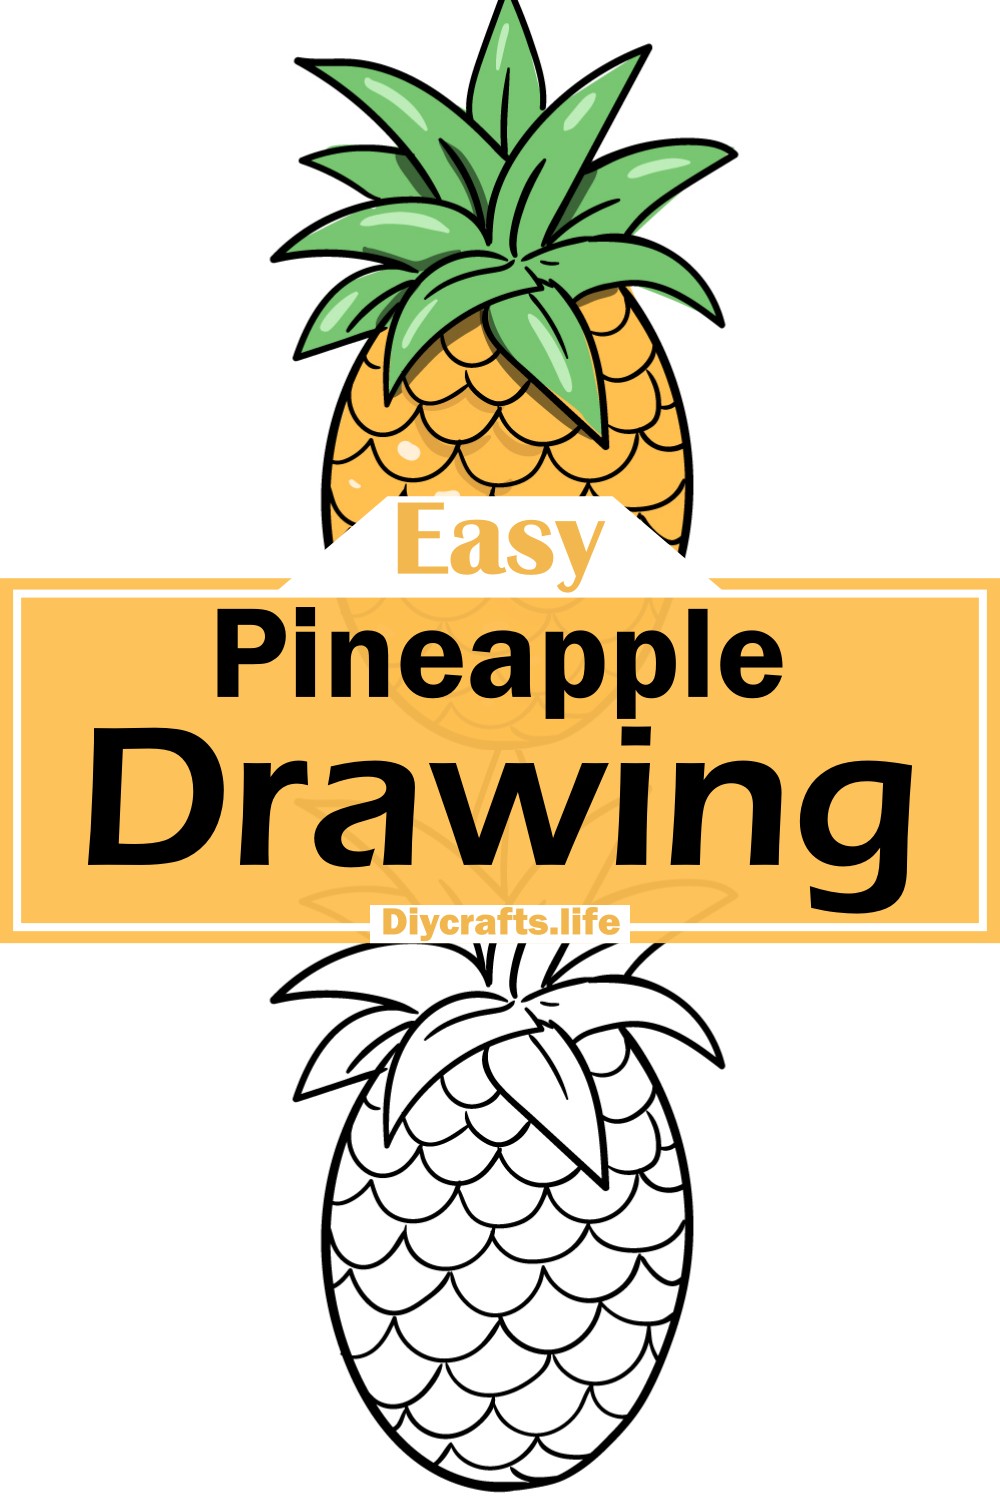 Pineapple Drawing Guide